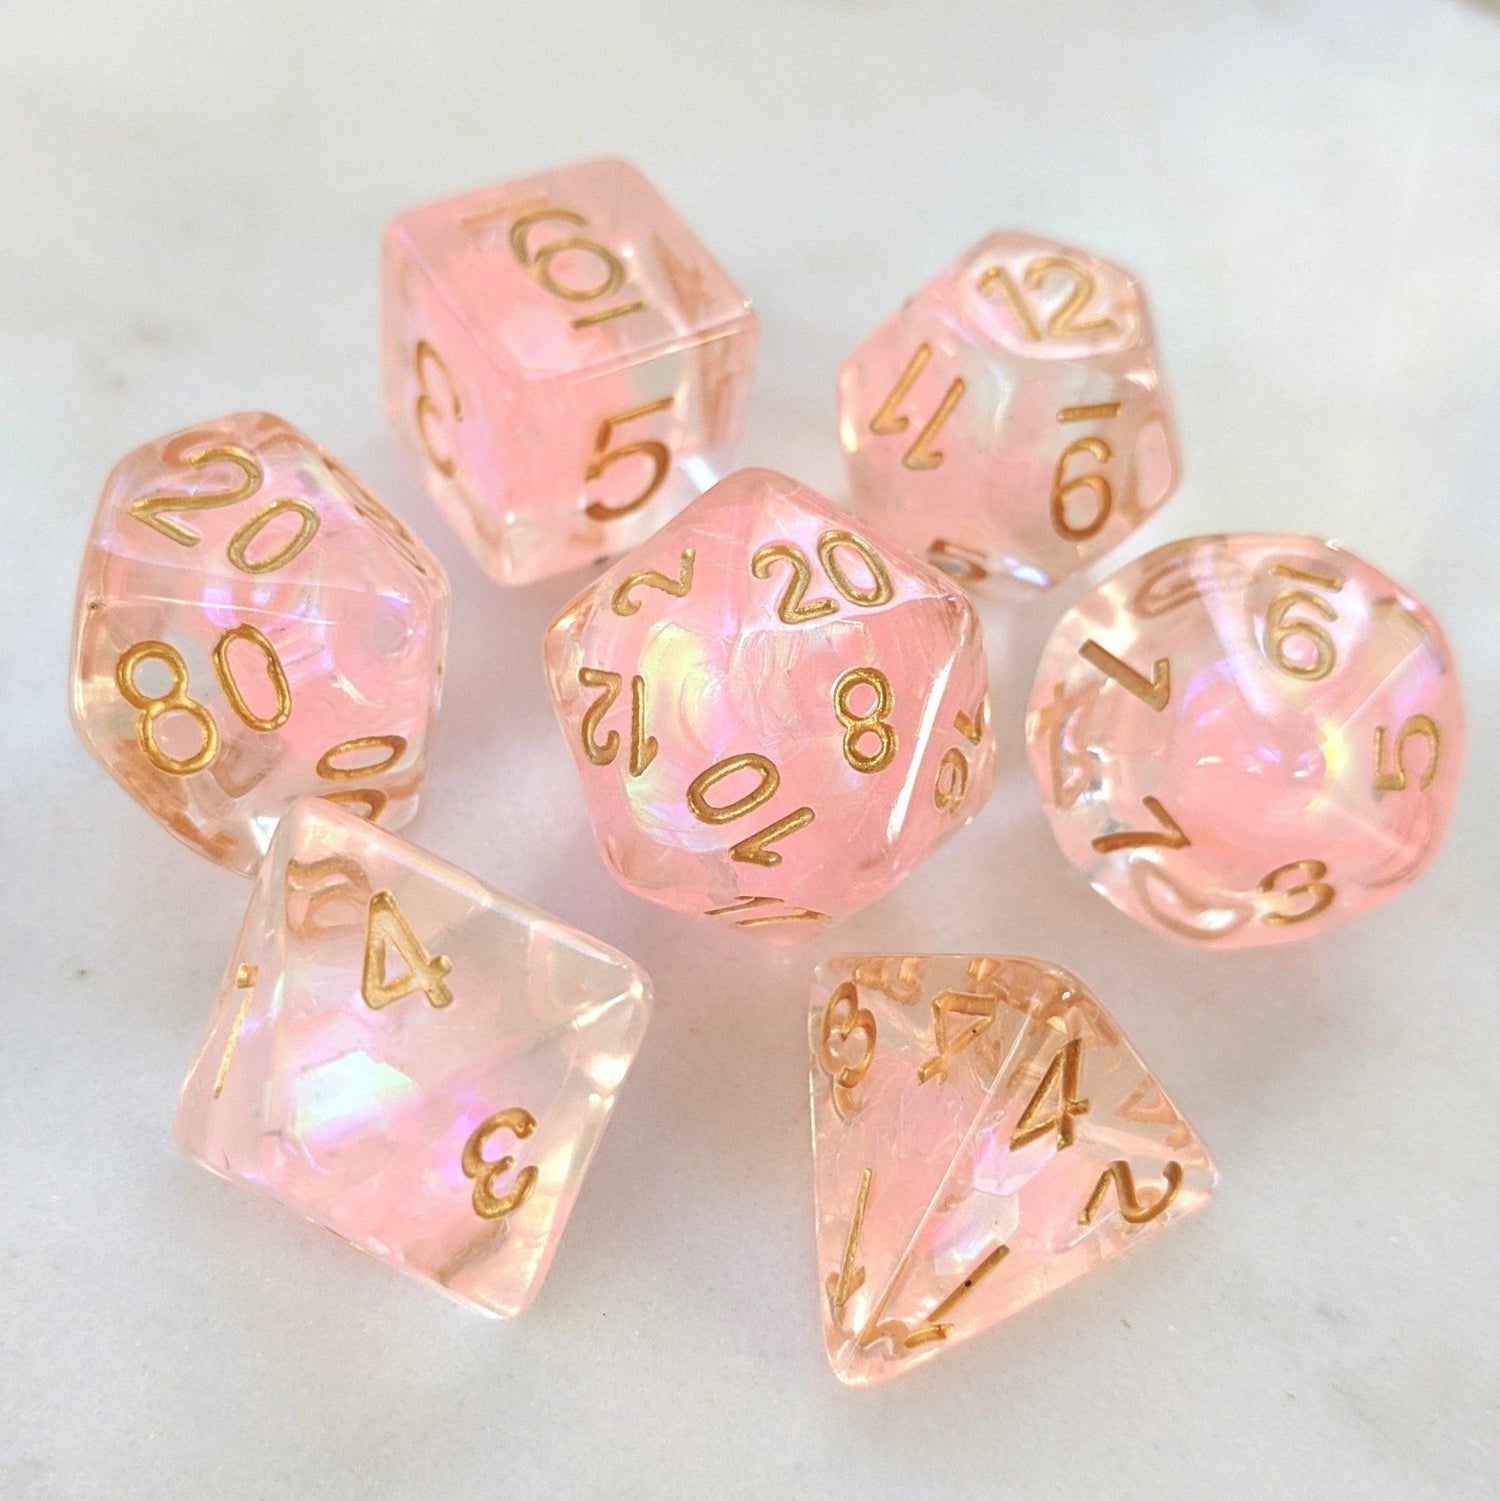 Rainbow Glint Dice - 7 Piece Set (Clear Resin with Pink Glitter) - The Fourth Place